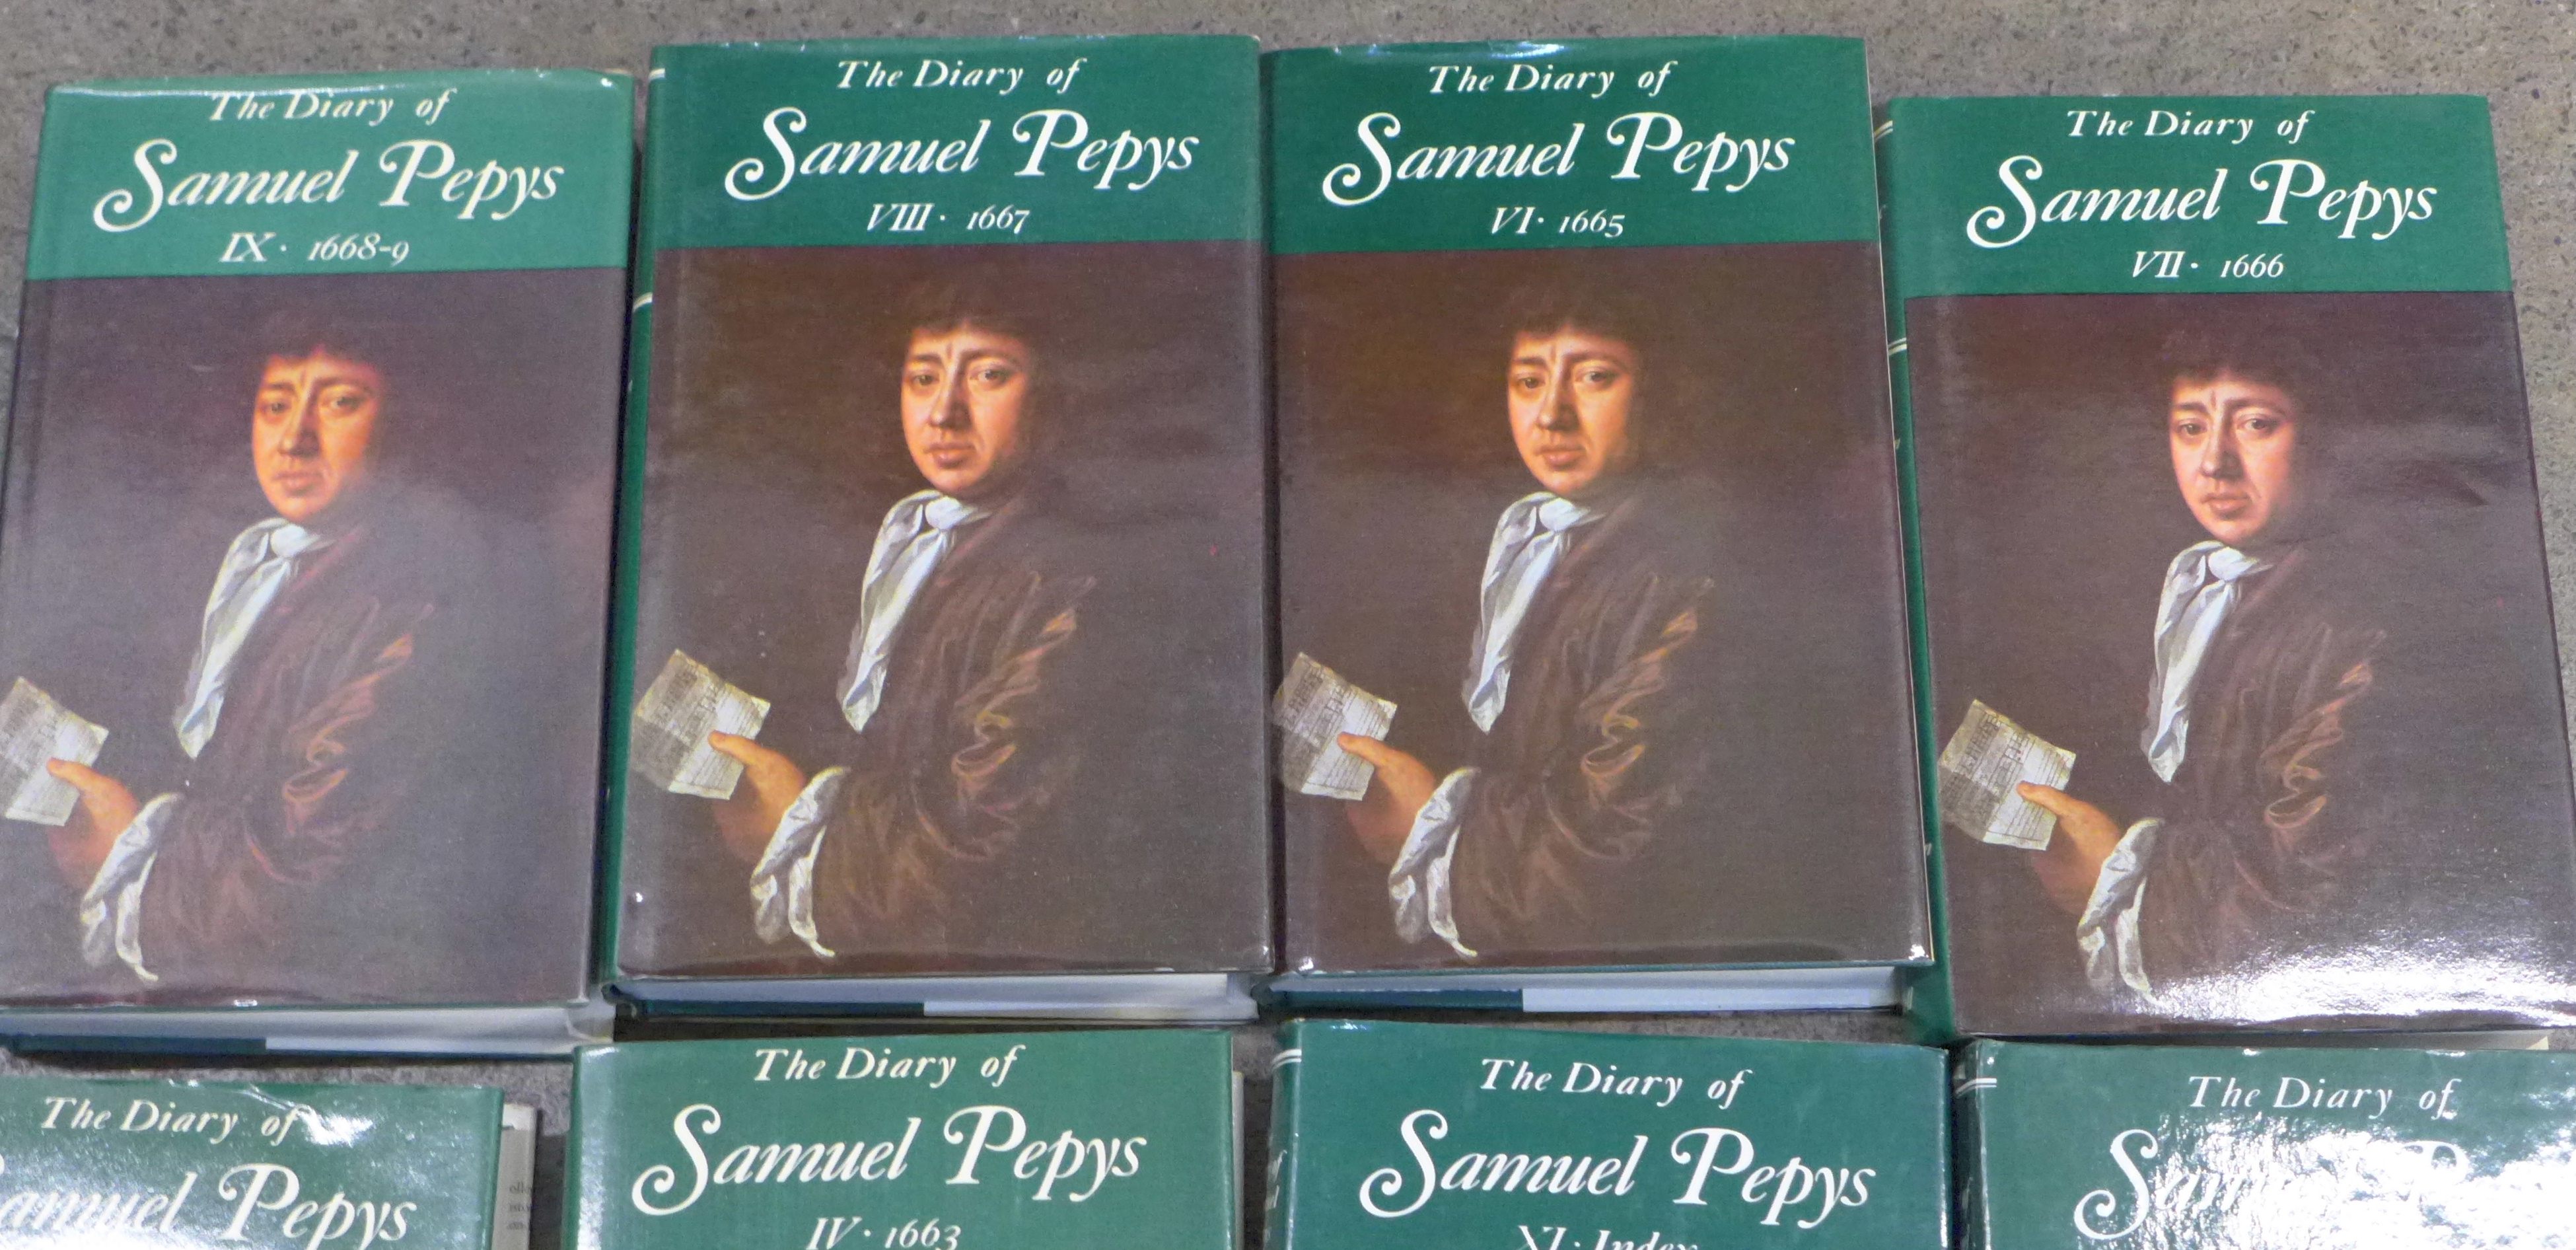 The Diary of Samuel Pepys, no. 1-11, published 1970s/80s by G Bell & Sons Ltd - Image 2 of 8